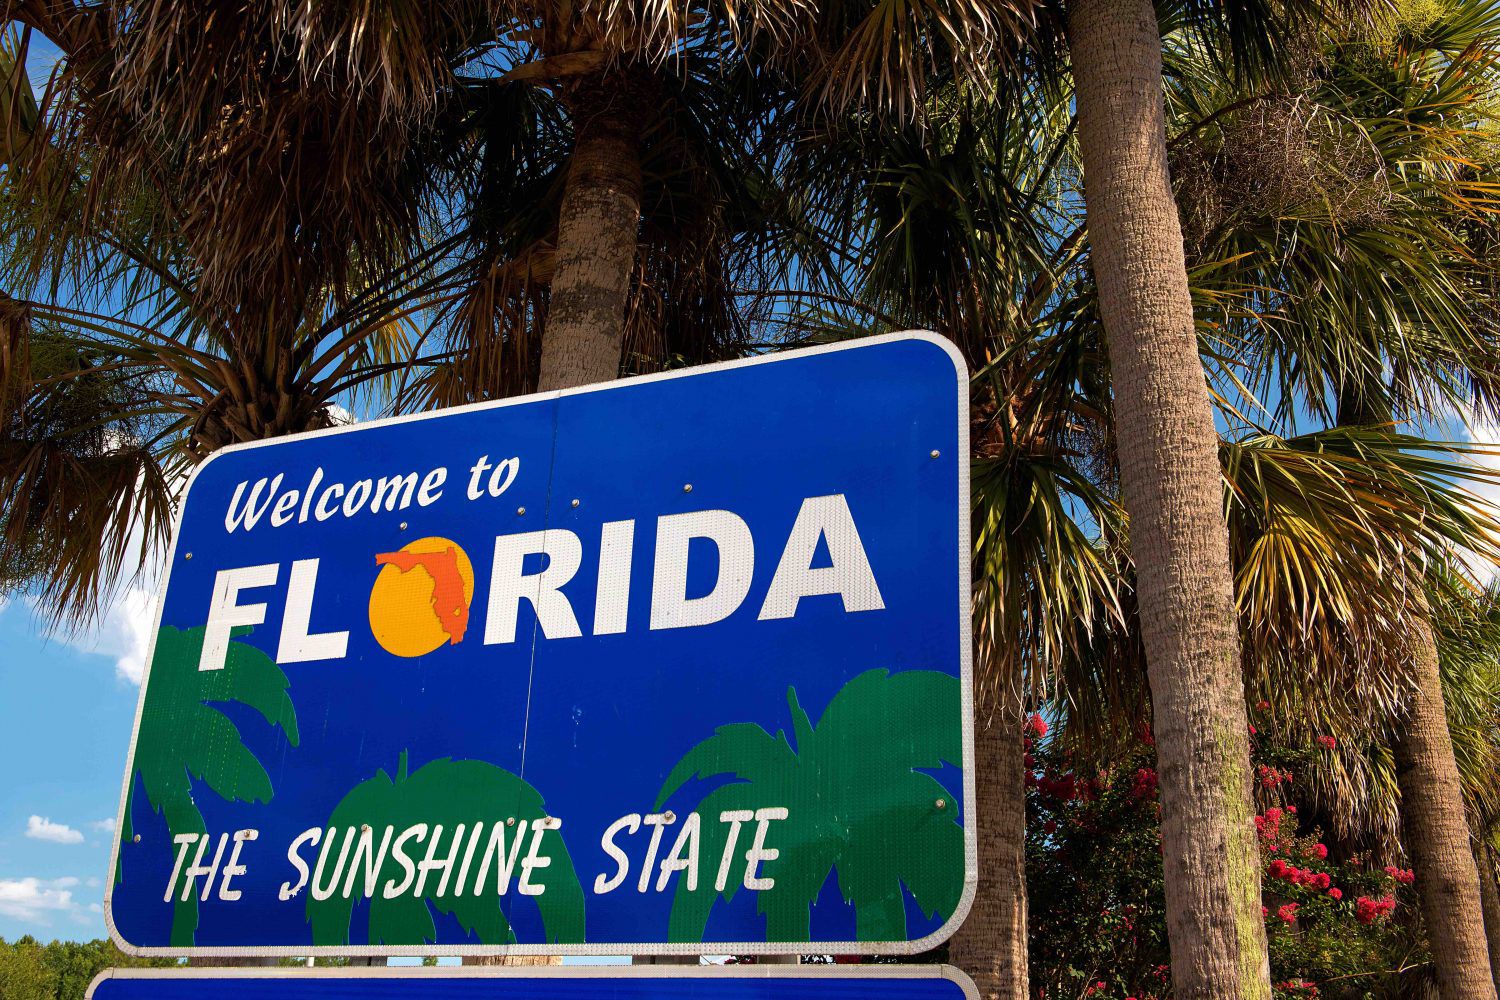 Florida’s-miami-dade-county-to-‘study-feasibility’-of-paying-taxes-with-crypto